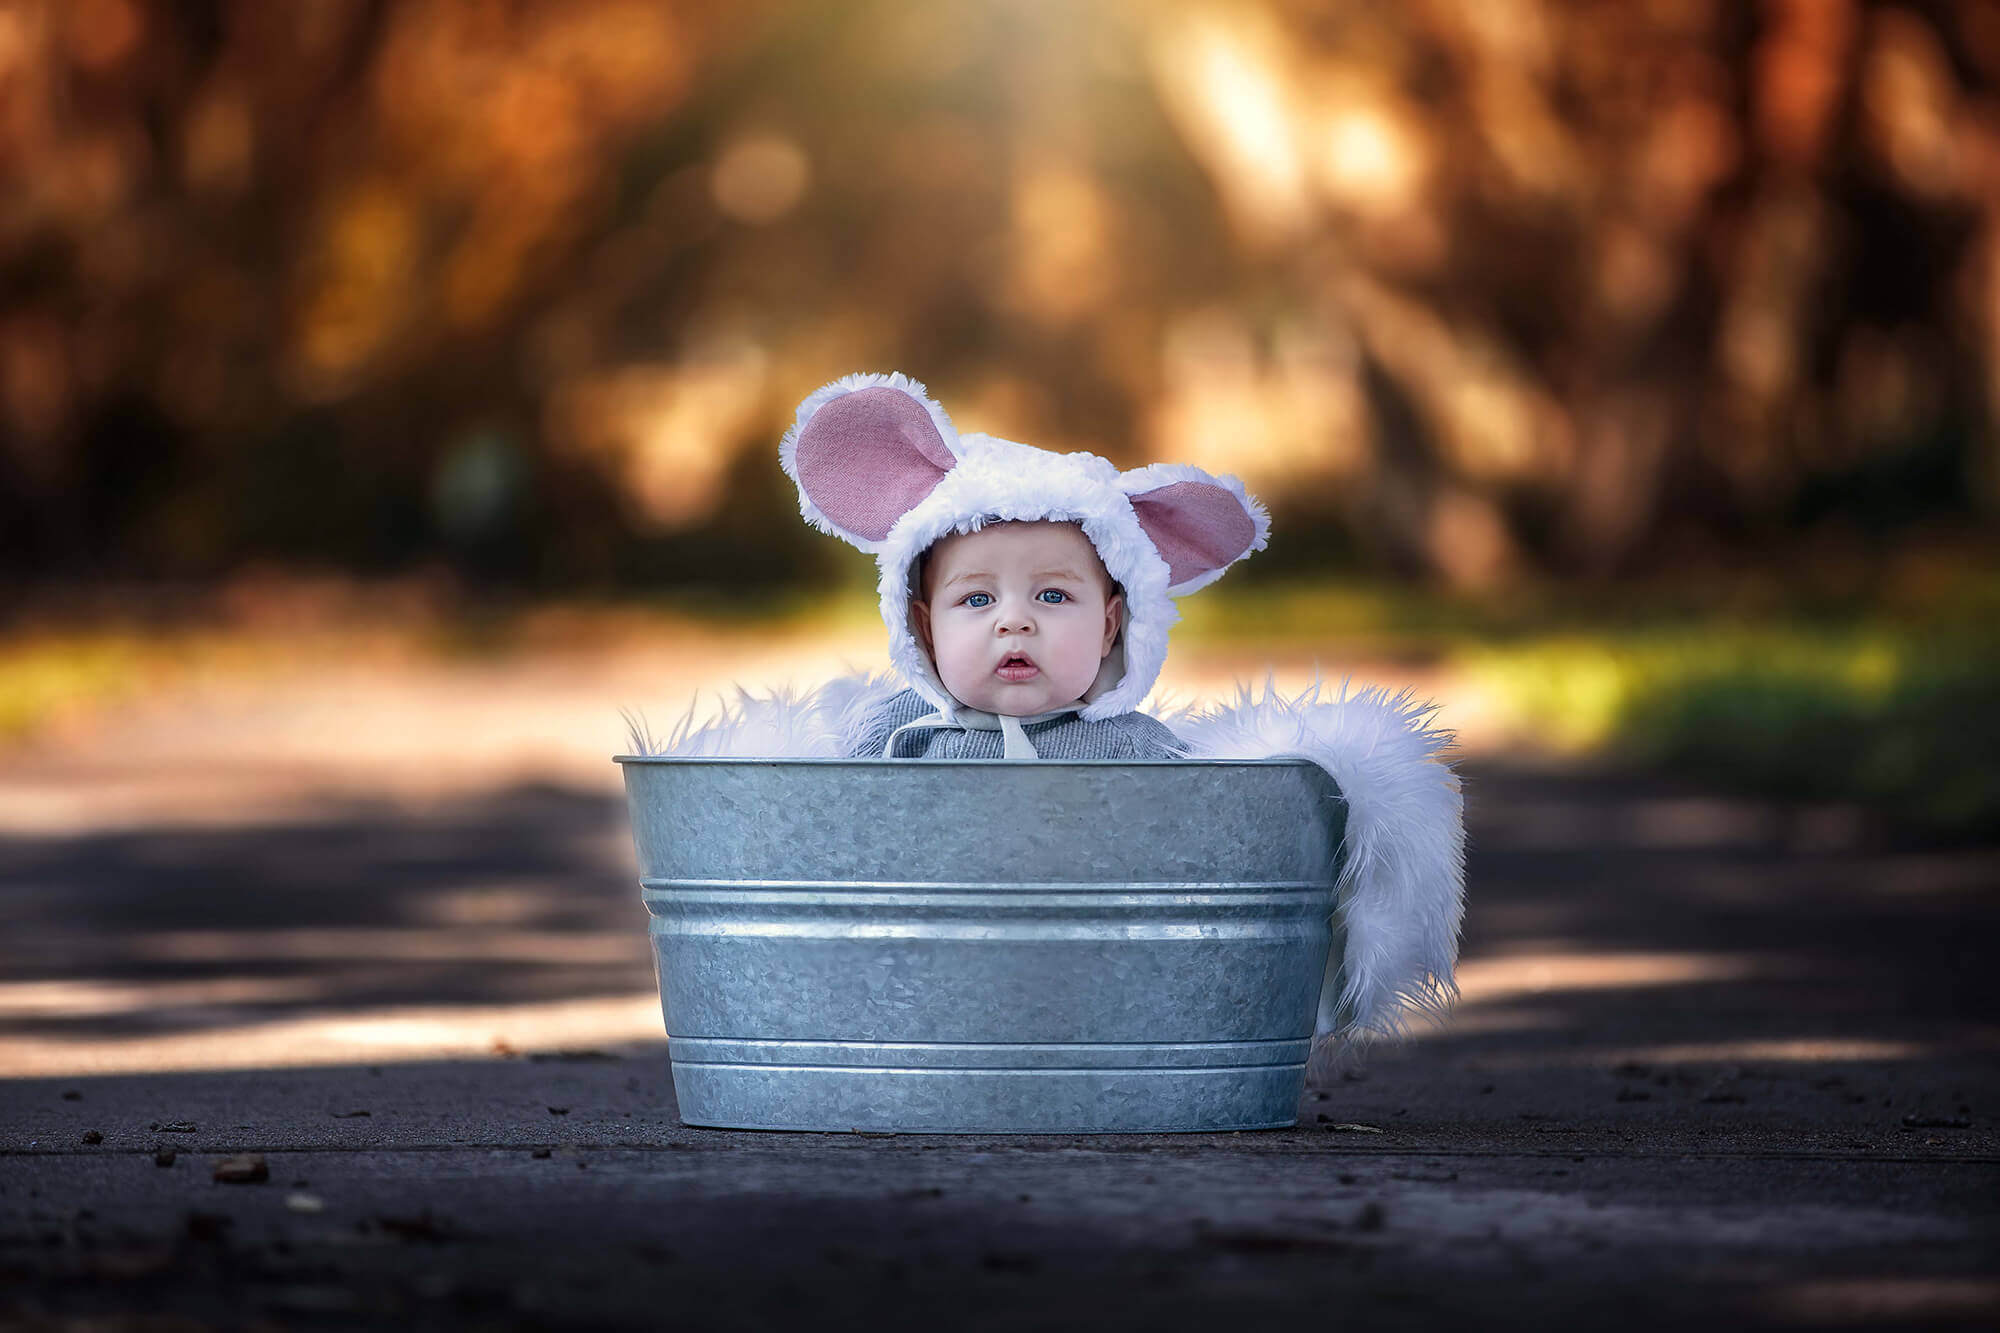 Adorable baby sitting inside a metal tub wearing a mouse bonnet from Kid to Kid Houston